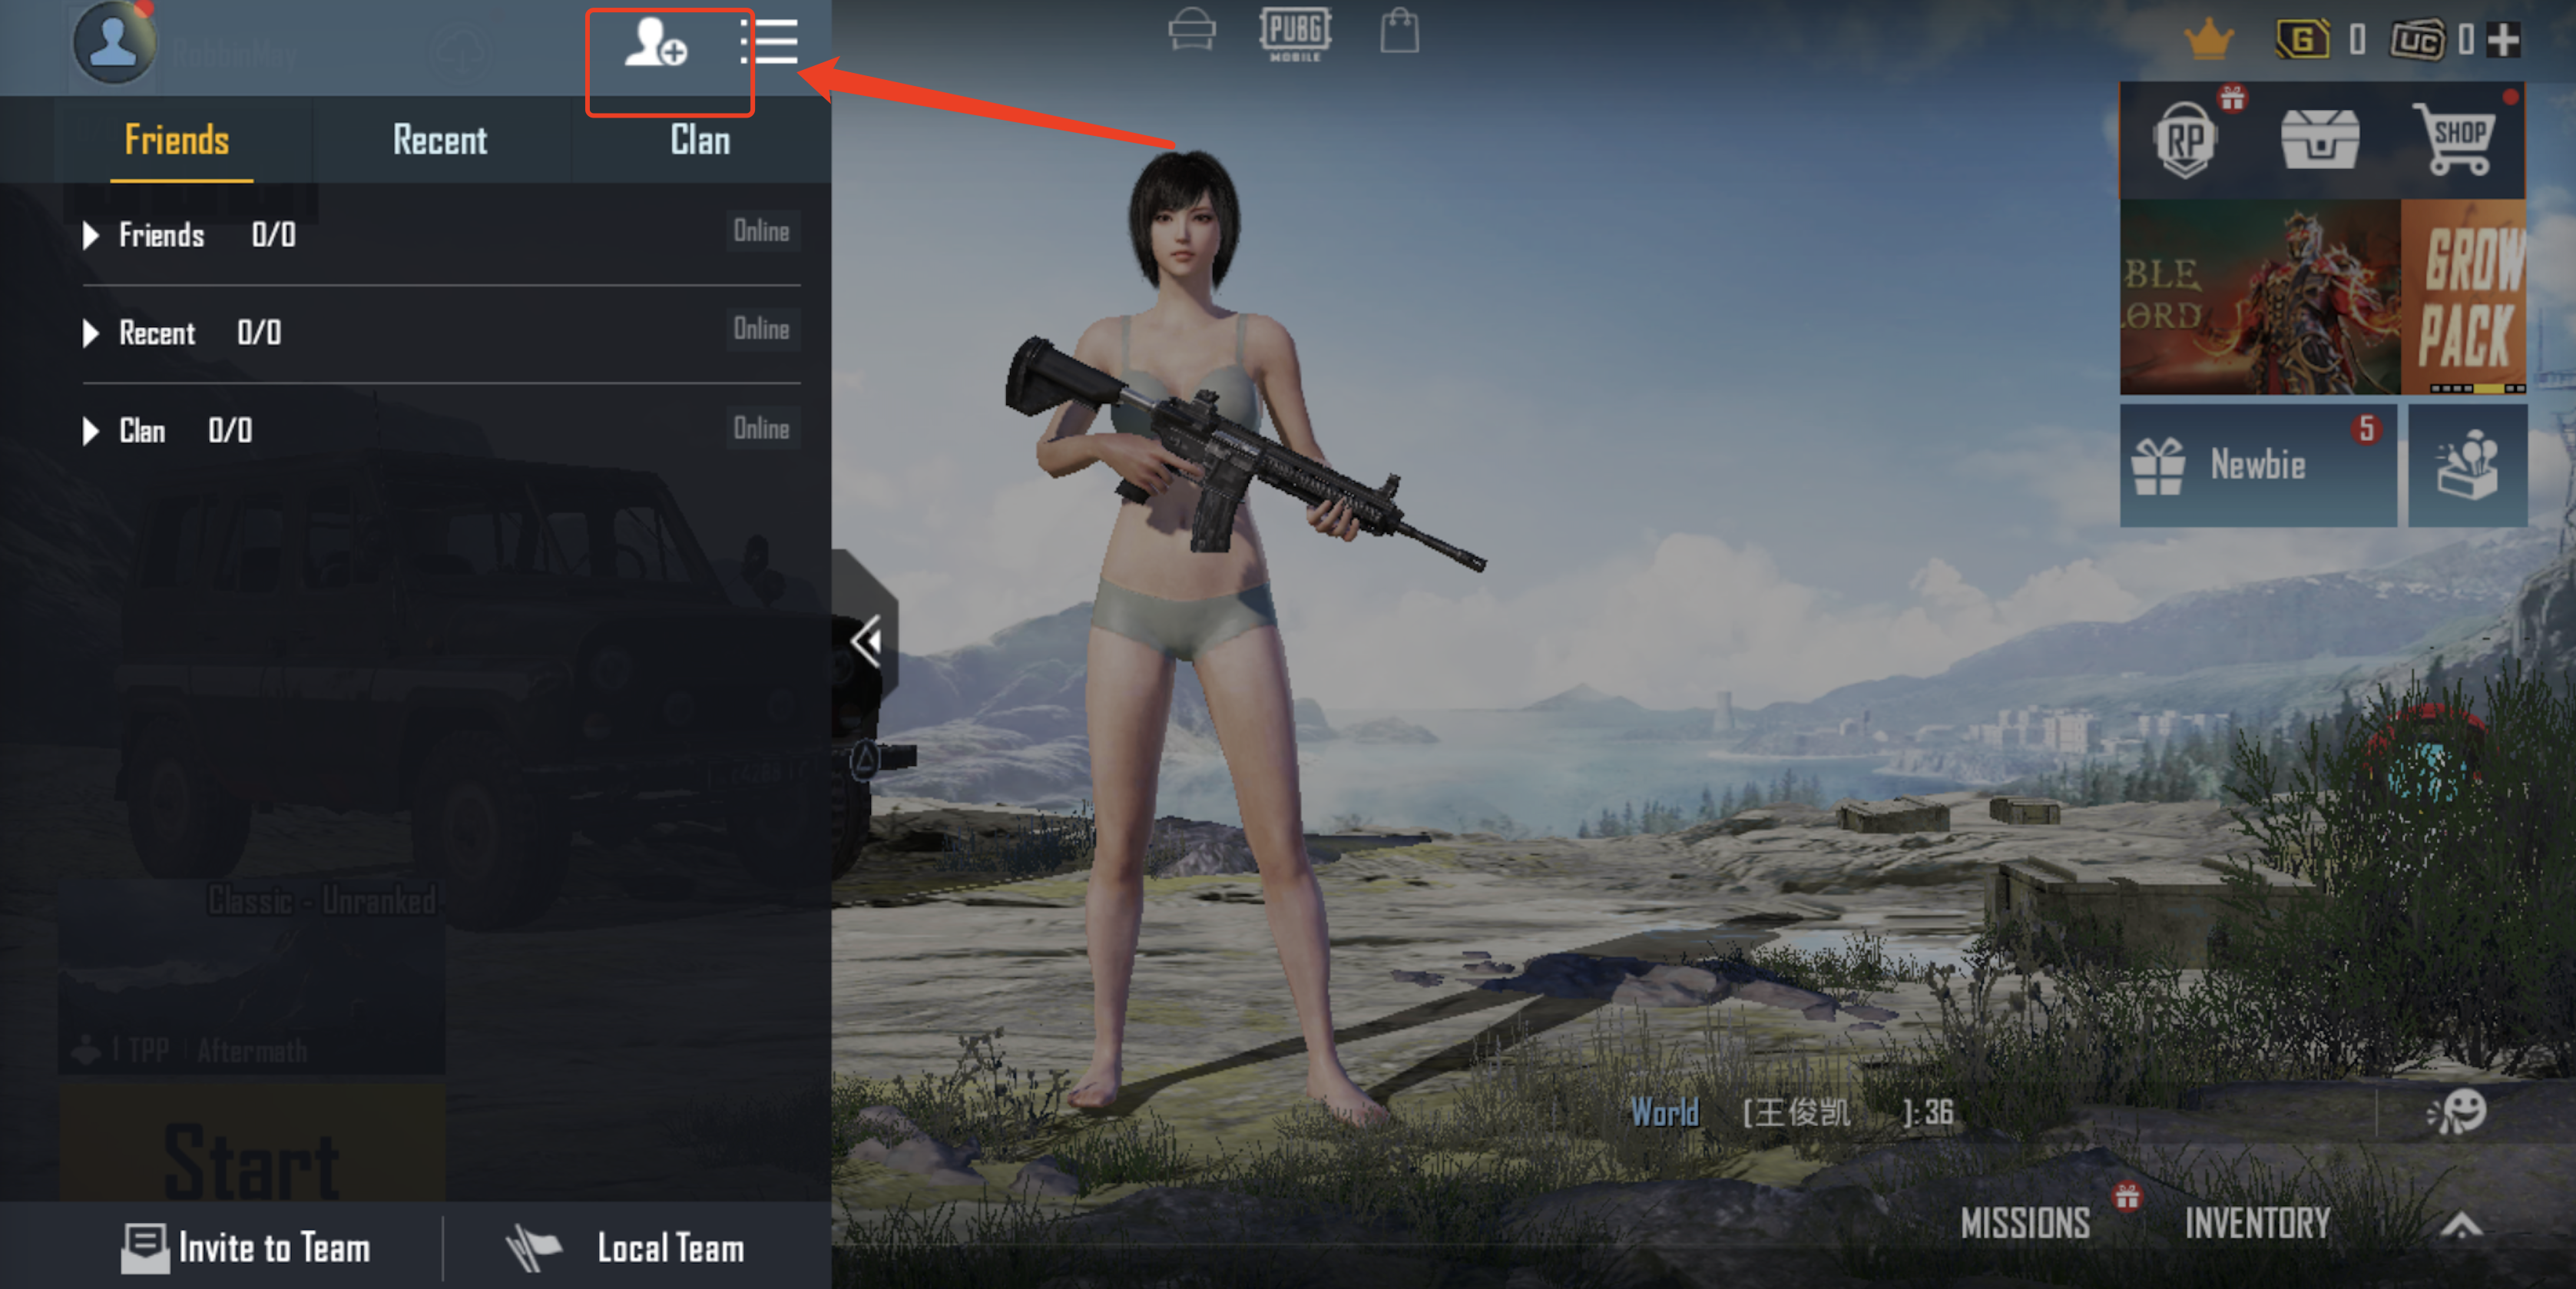 HOW TO PLAY MULTIPLAYER/ADD FRIENDS IN PUBG BATTLEGROUNDS 